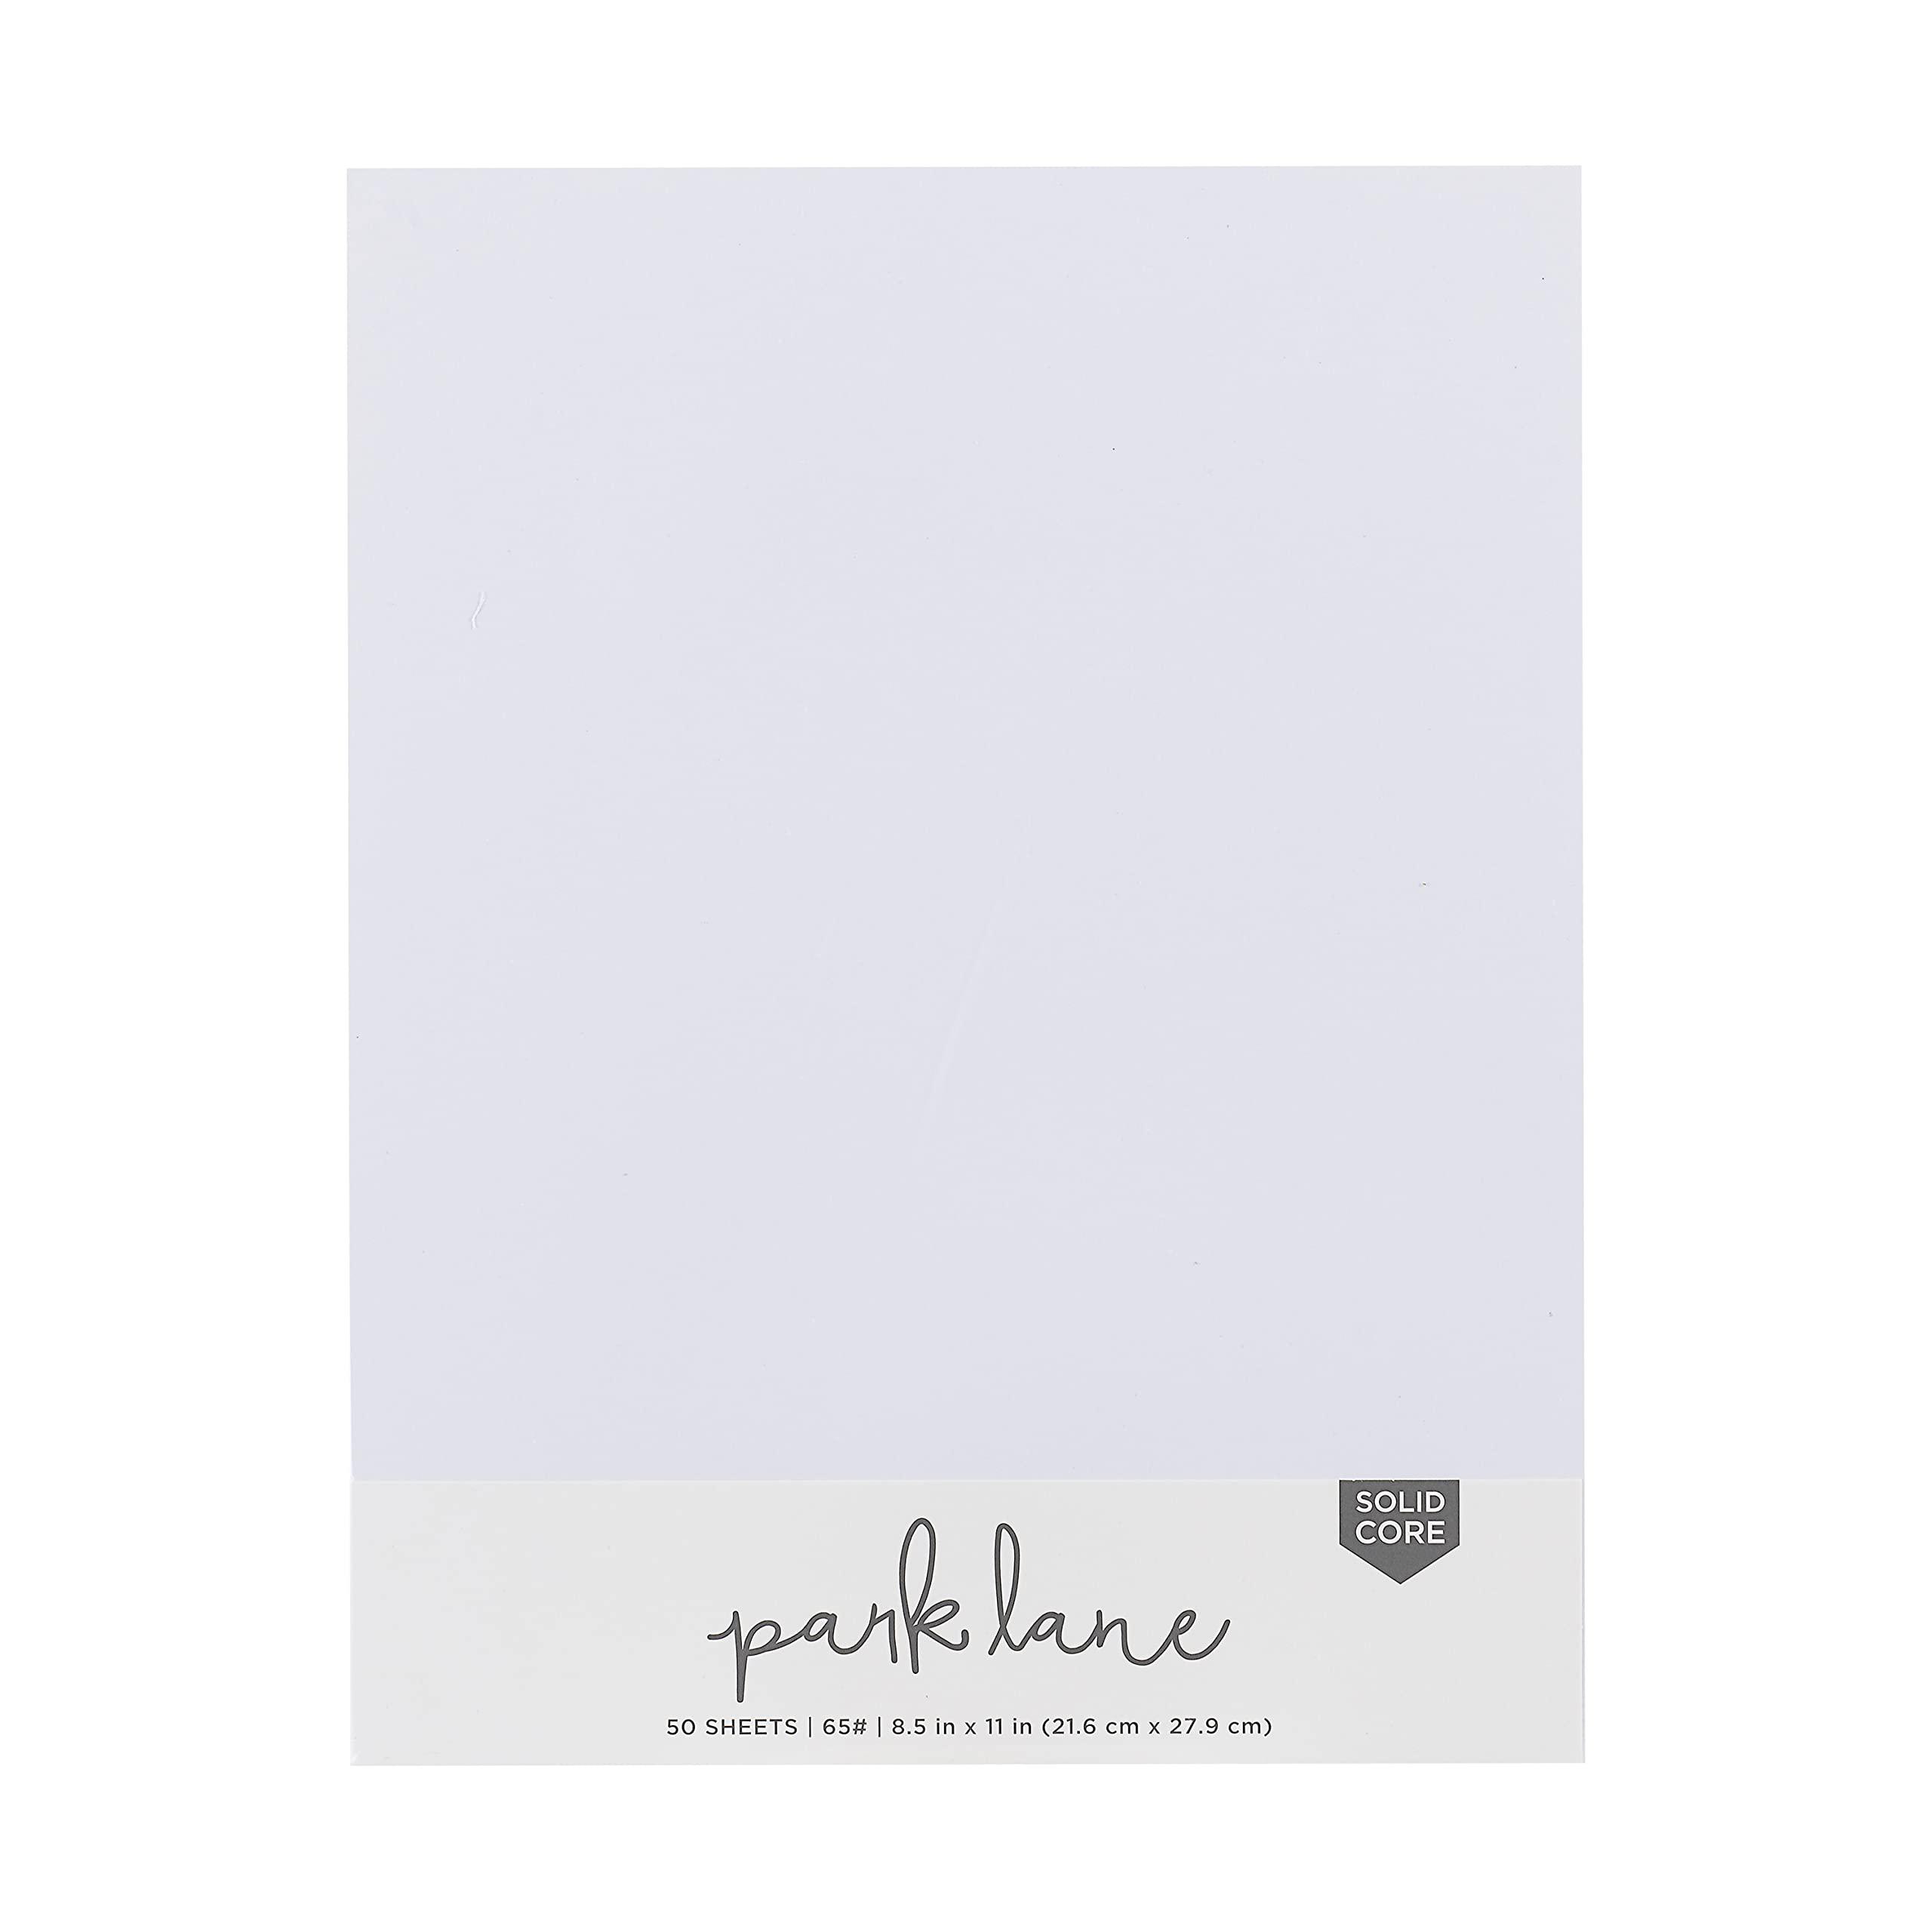 Park Lane cardstock 8.5 x 11 paper pack - white cardstock scrapbook paper 65lb - double sided card stock for crafts, embossing, cardmak